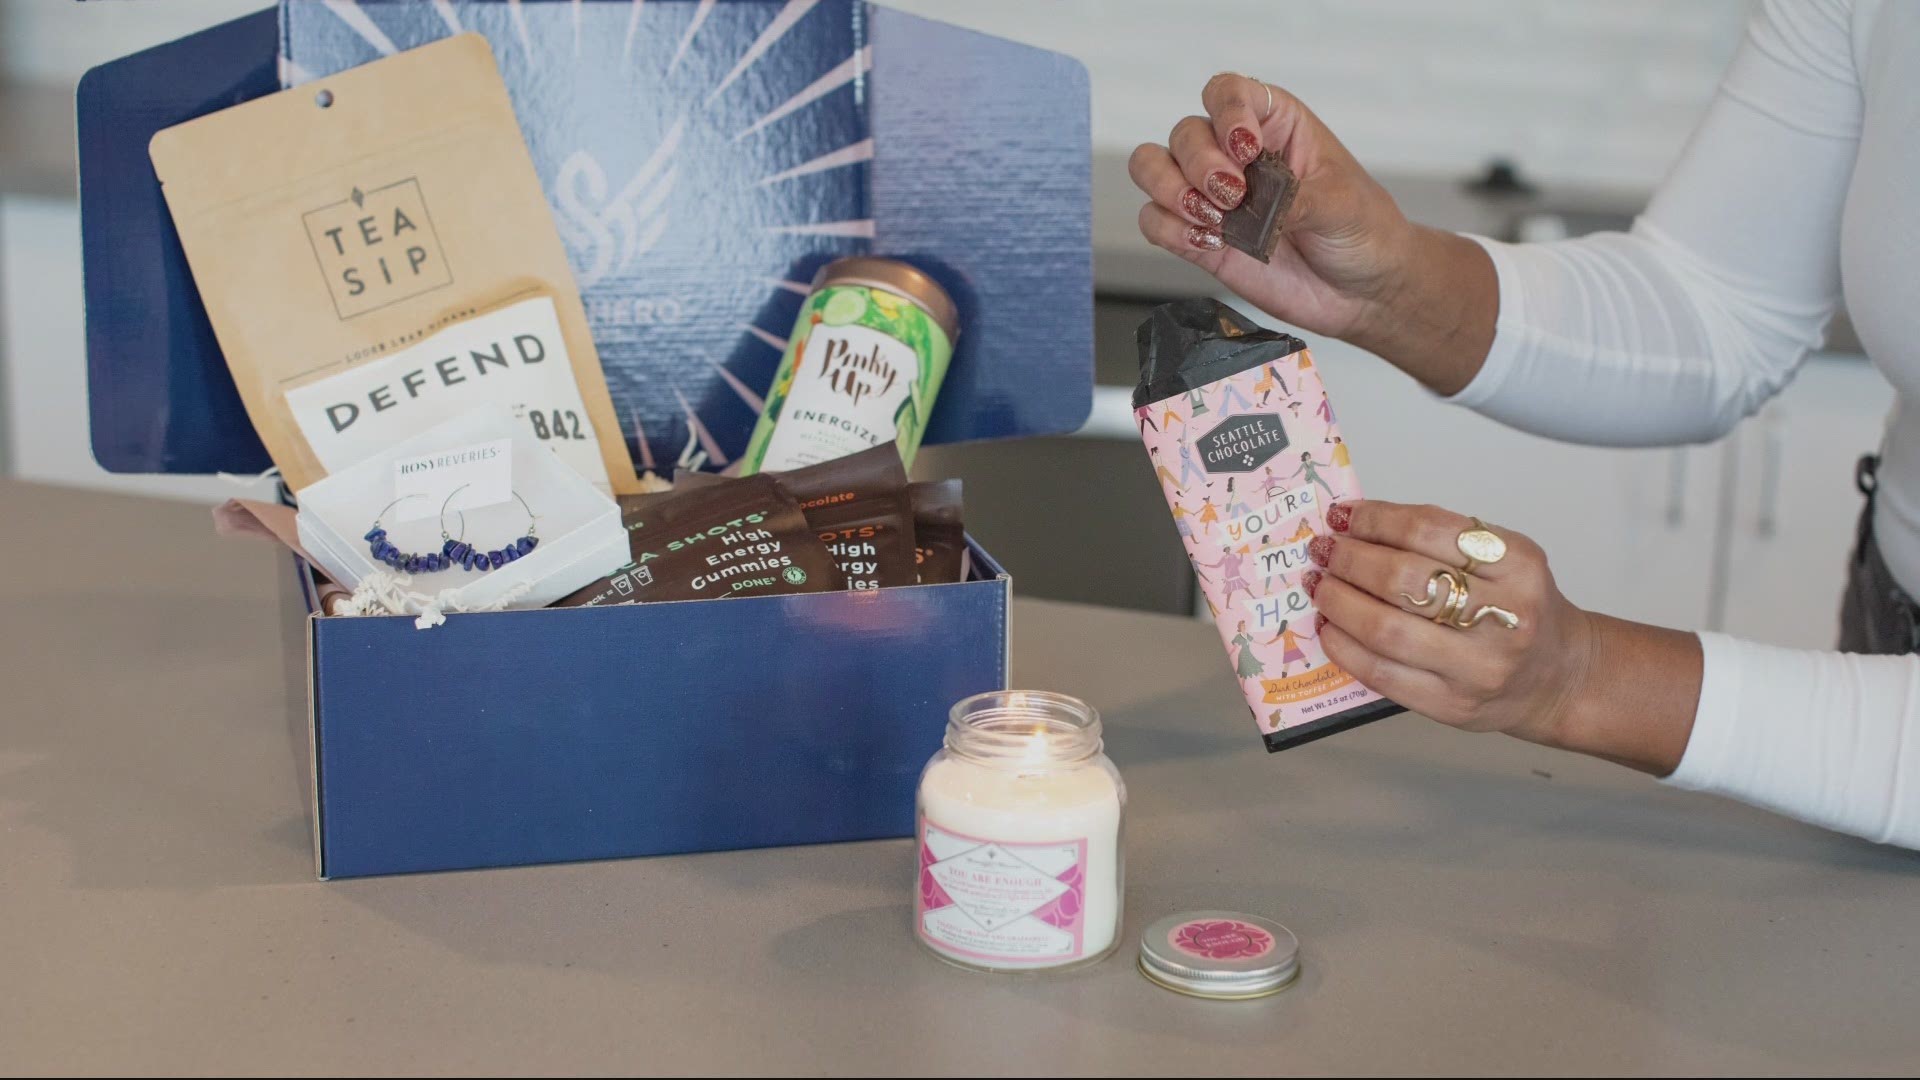 "Super Hero Mamas" offers unique gift boxes from women-run small businesses across the United States and Canada.